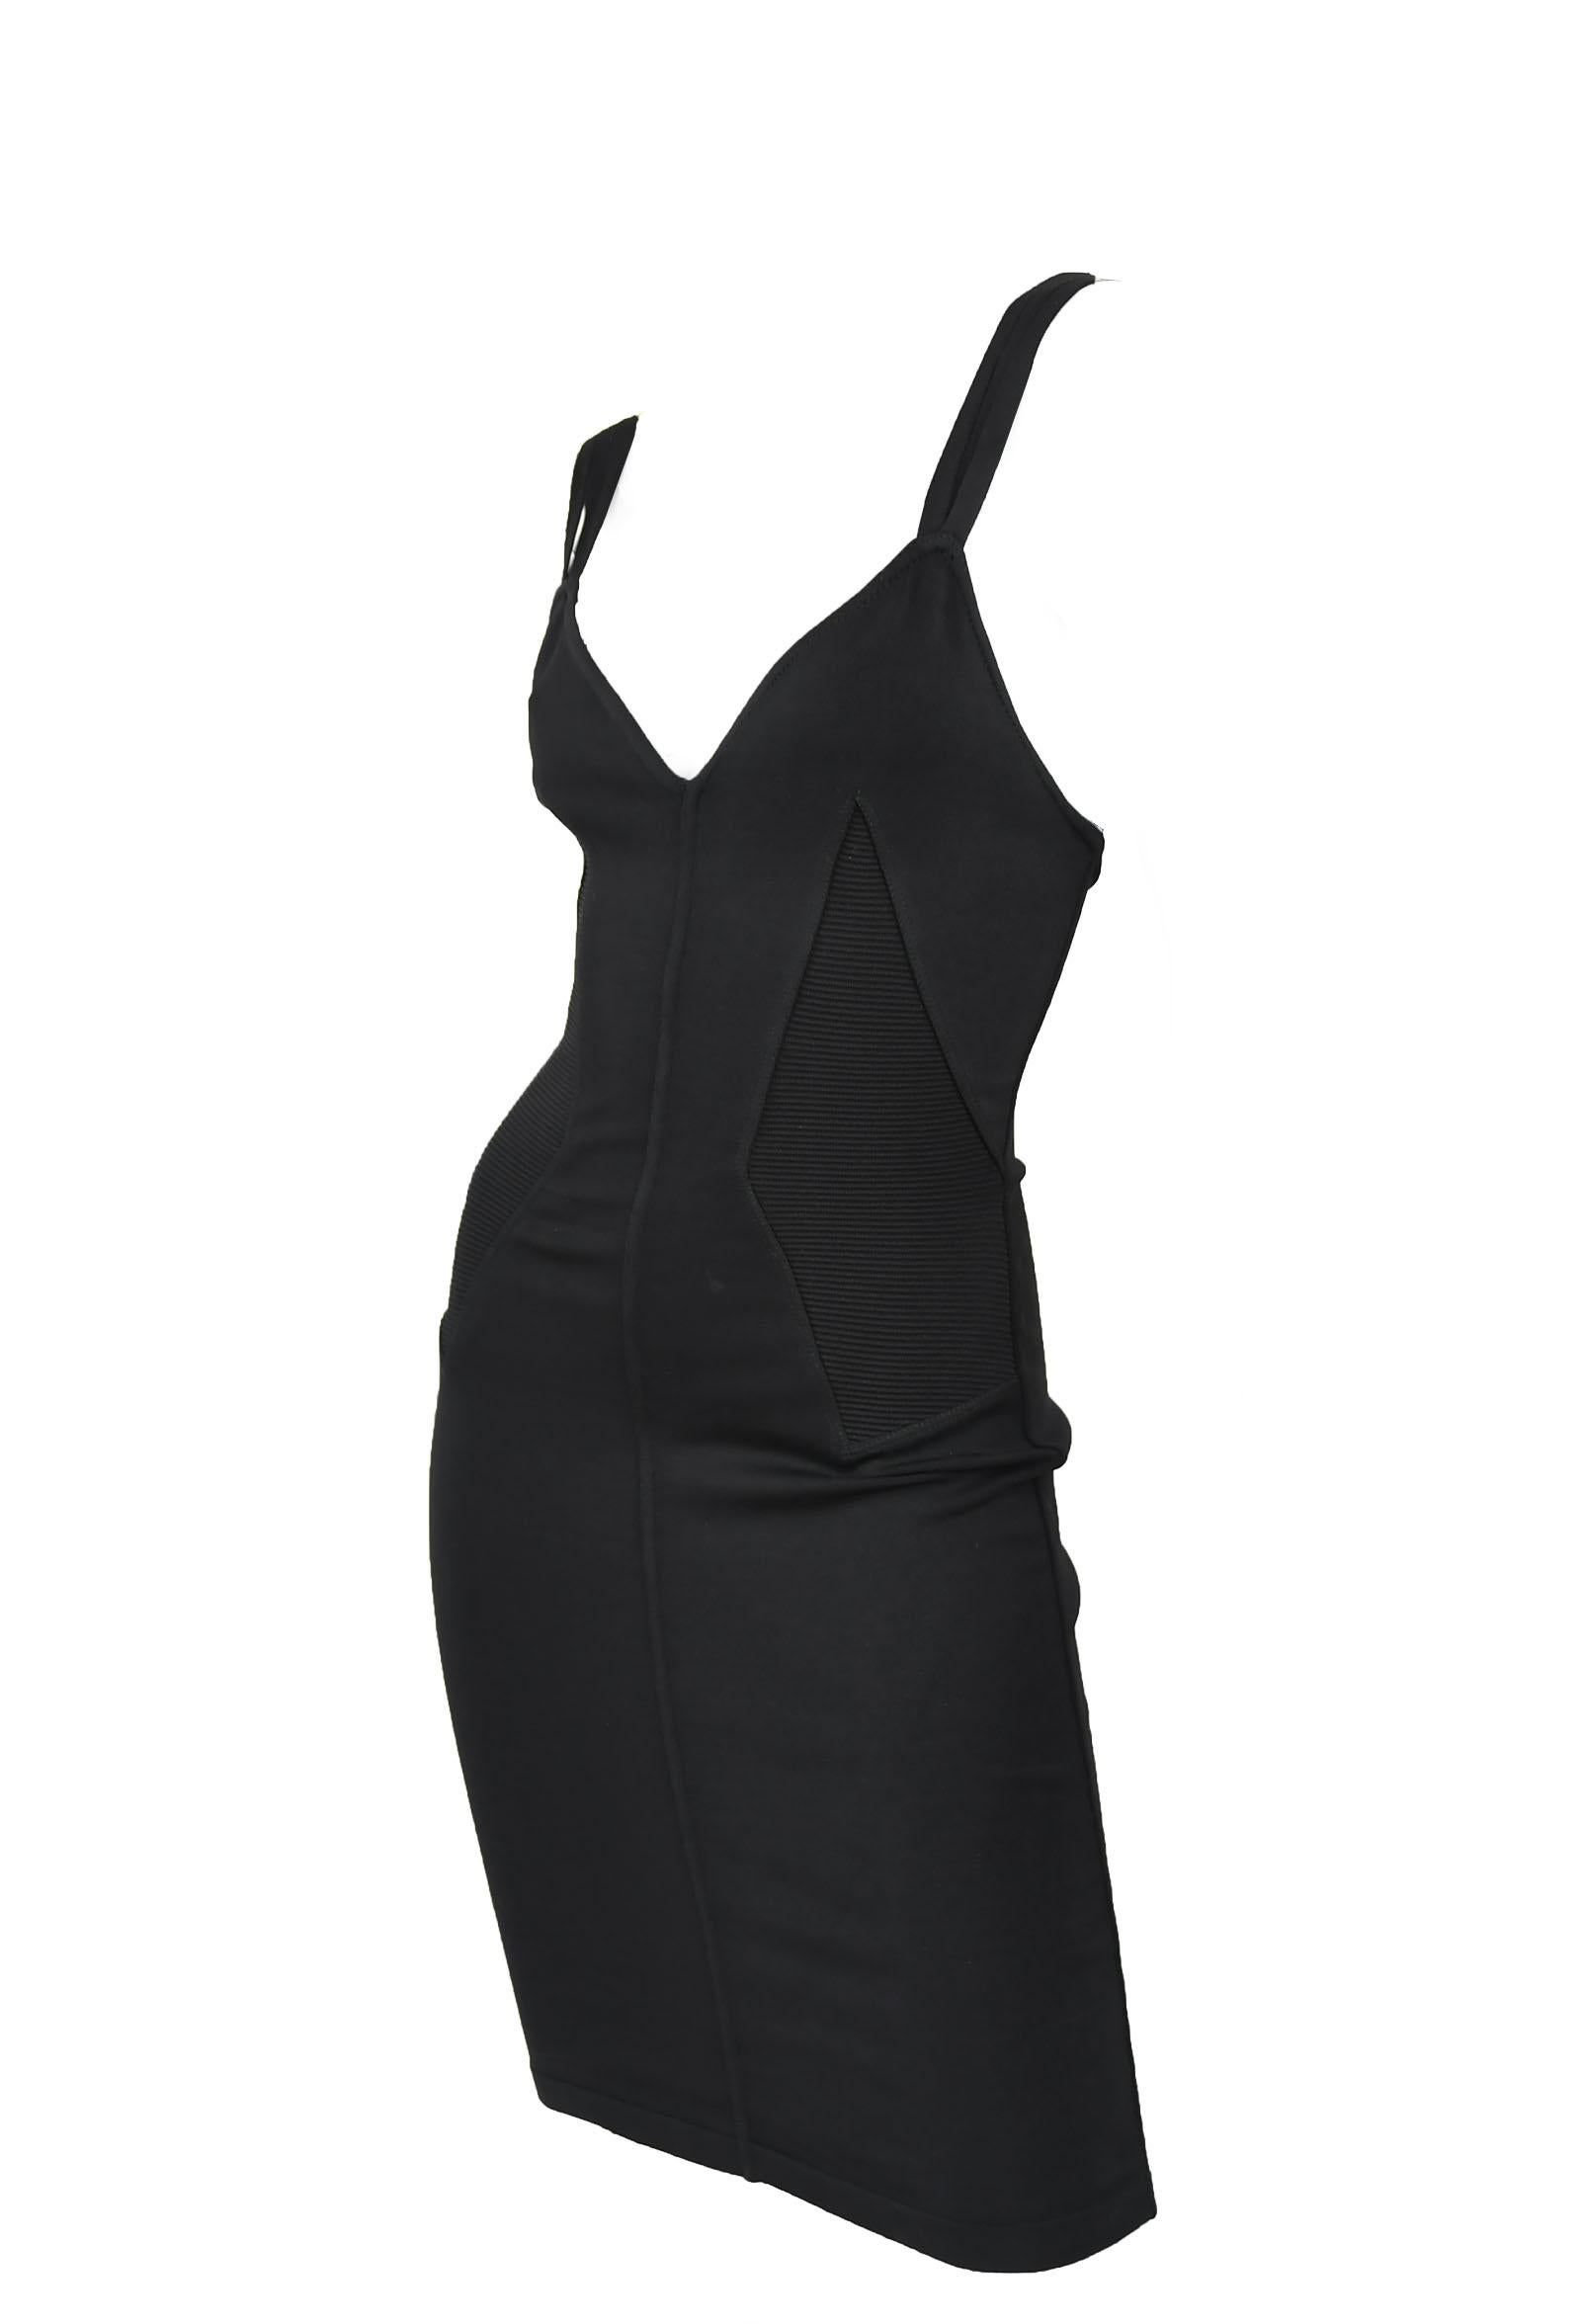 Sexy, strappy black Alaia vintage dress with gorgeous ribbed detail through the bodice.  This is a rare find from the 1980's.  Perfect outfit for date night.  

Size: S

Condition: Pristine vintage condition

Composition: 85% rayon, 15%